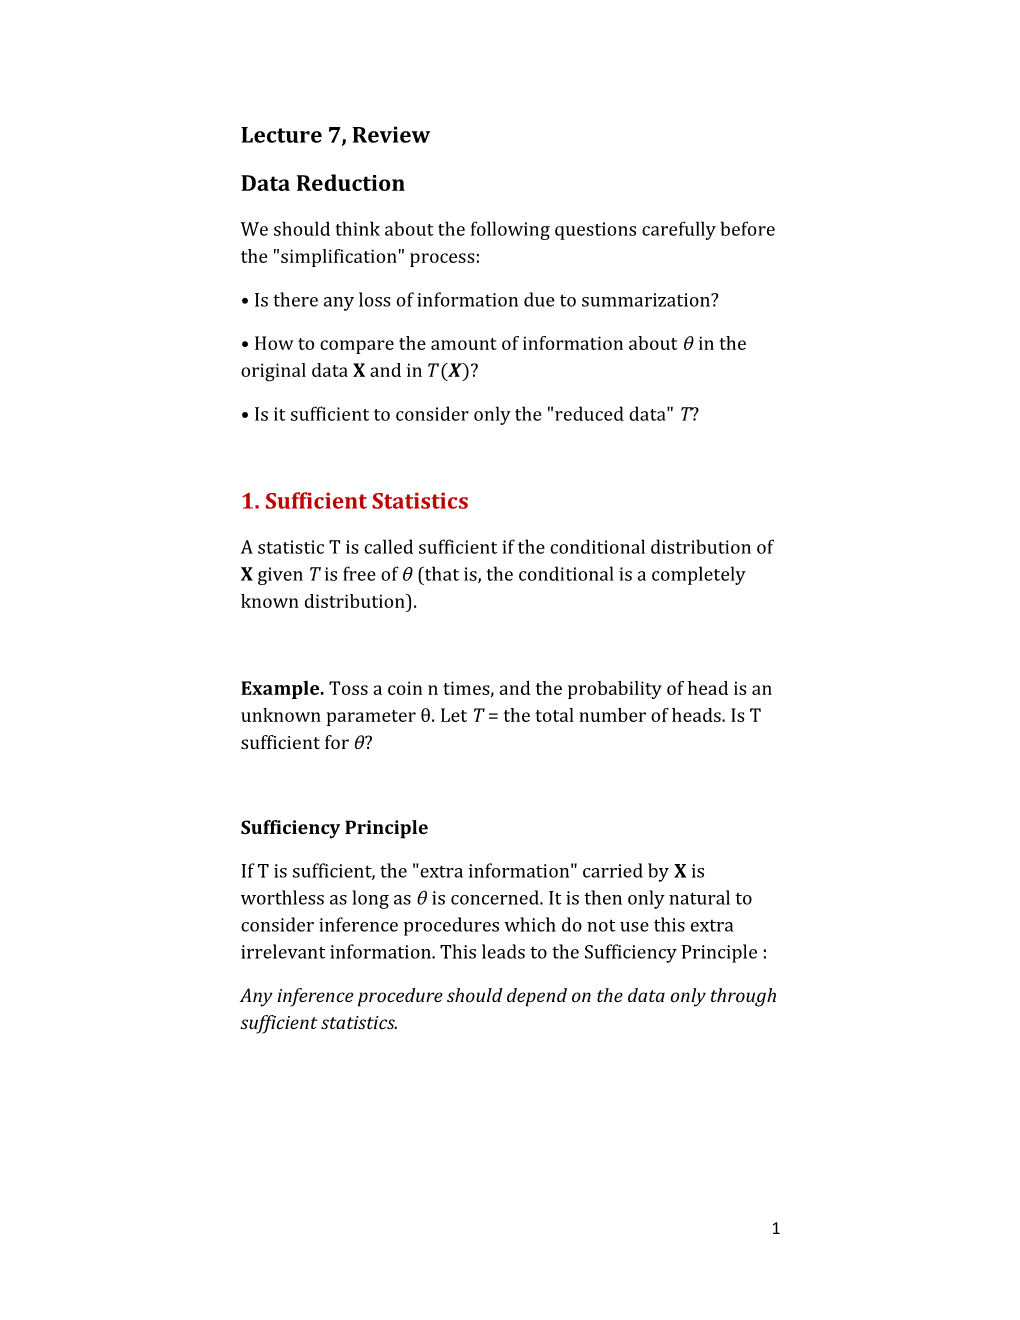 Lecture 7, Review Data Reduction 1. Sufficient Statistics